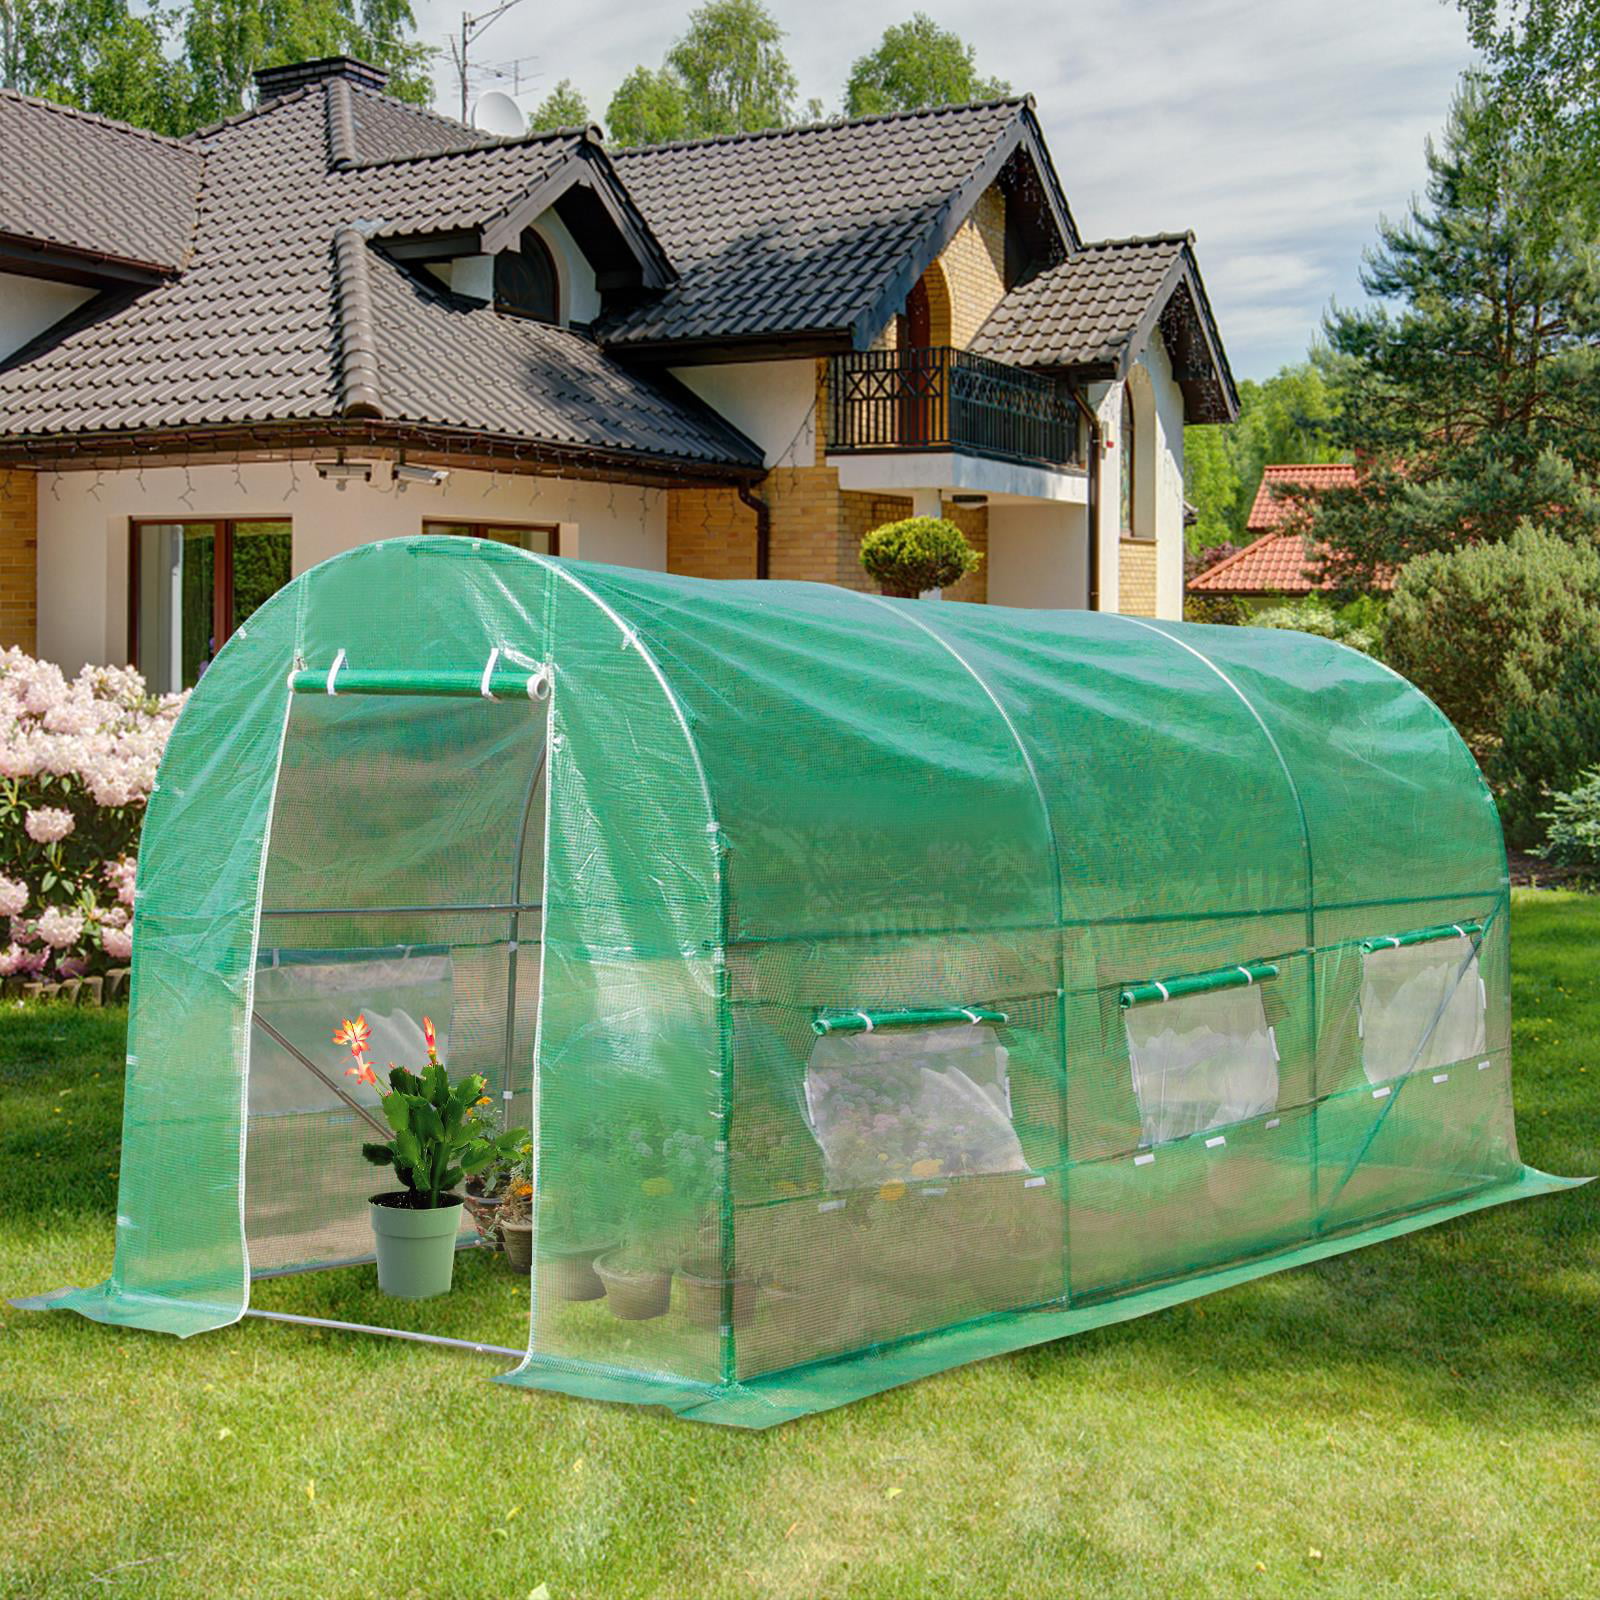 Ktaxon 15′x7′x7′ Greenhouse with One Zippered Door and 6 Roll up Windows